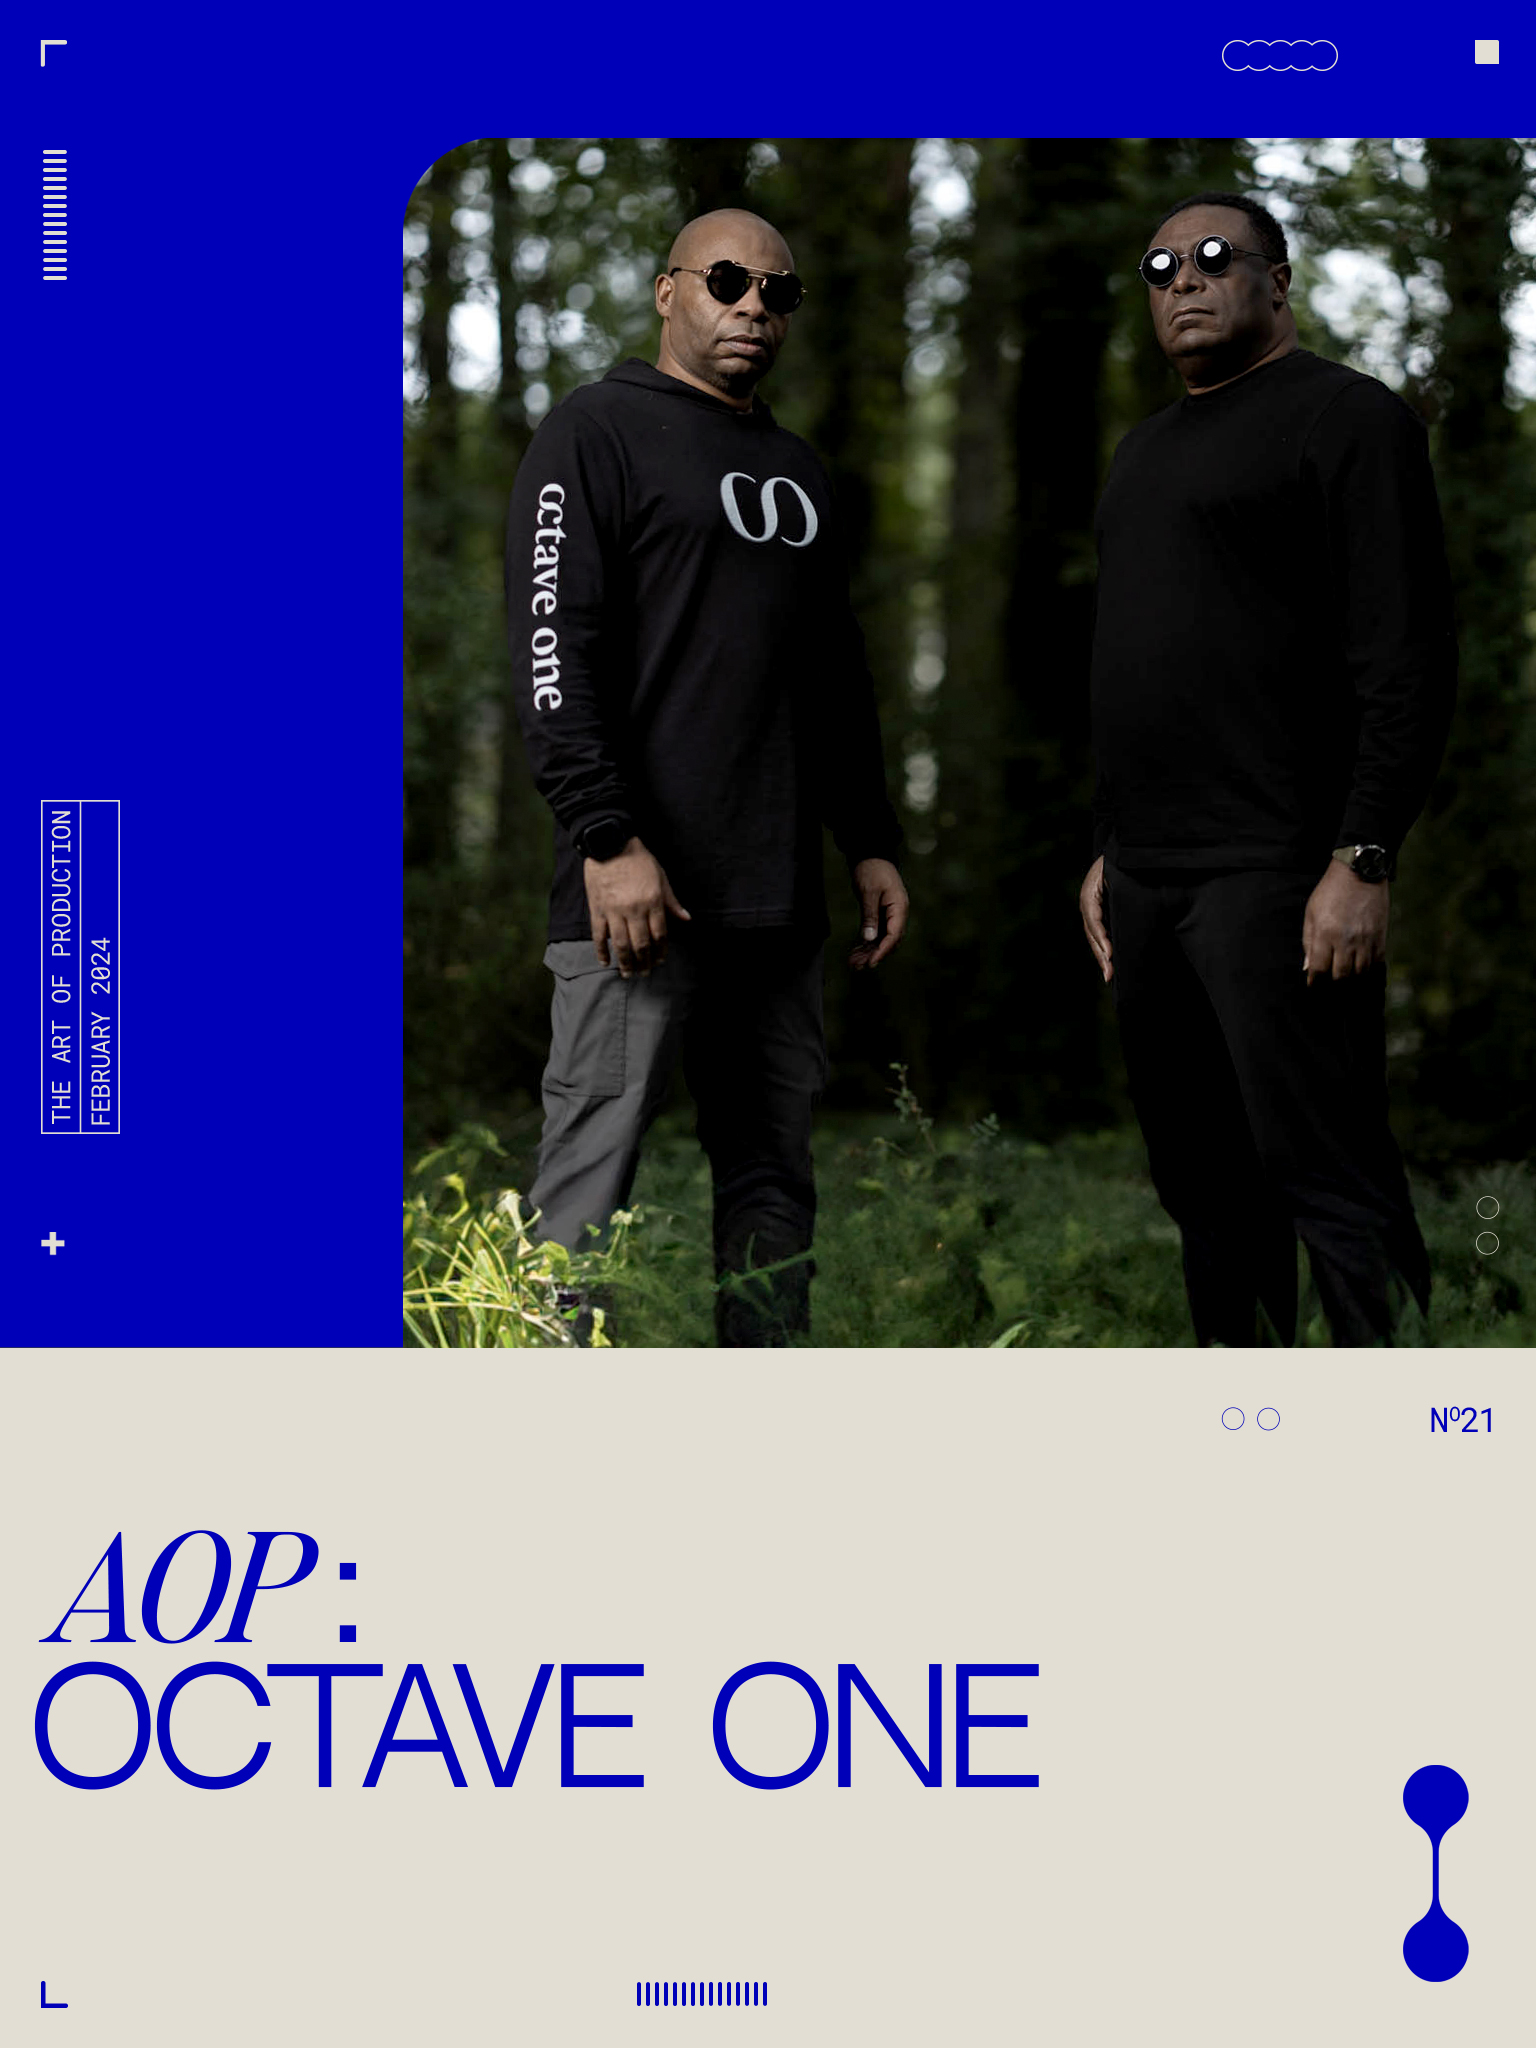 The Art of Production: Octave One